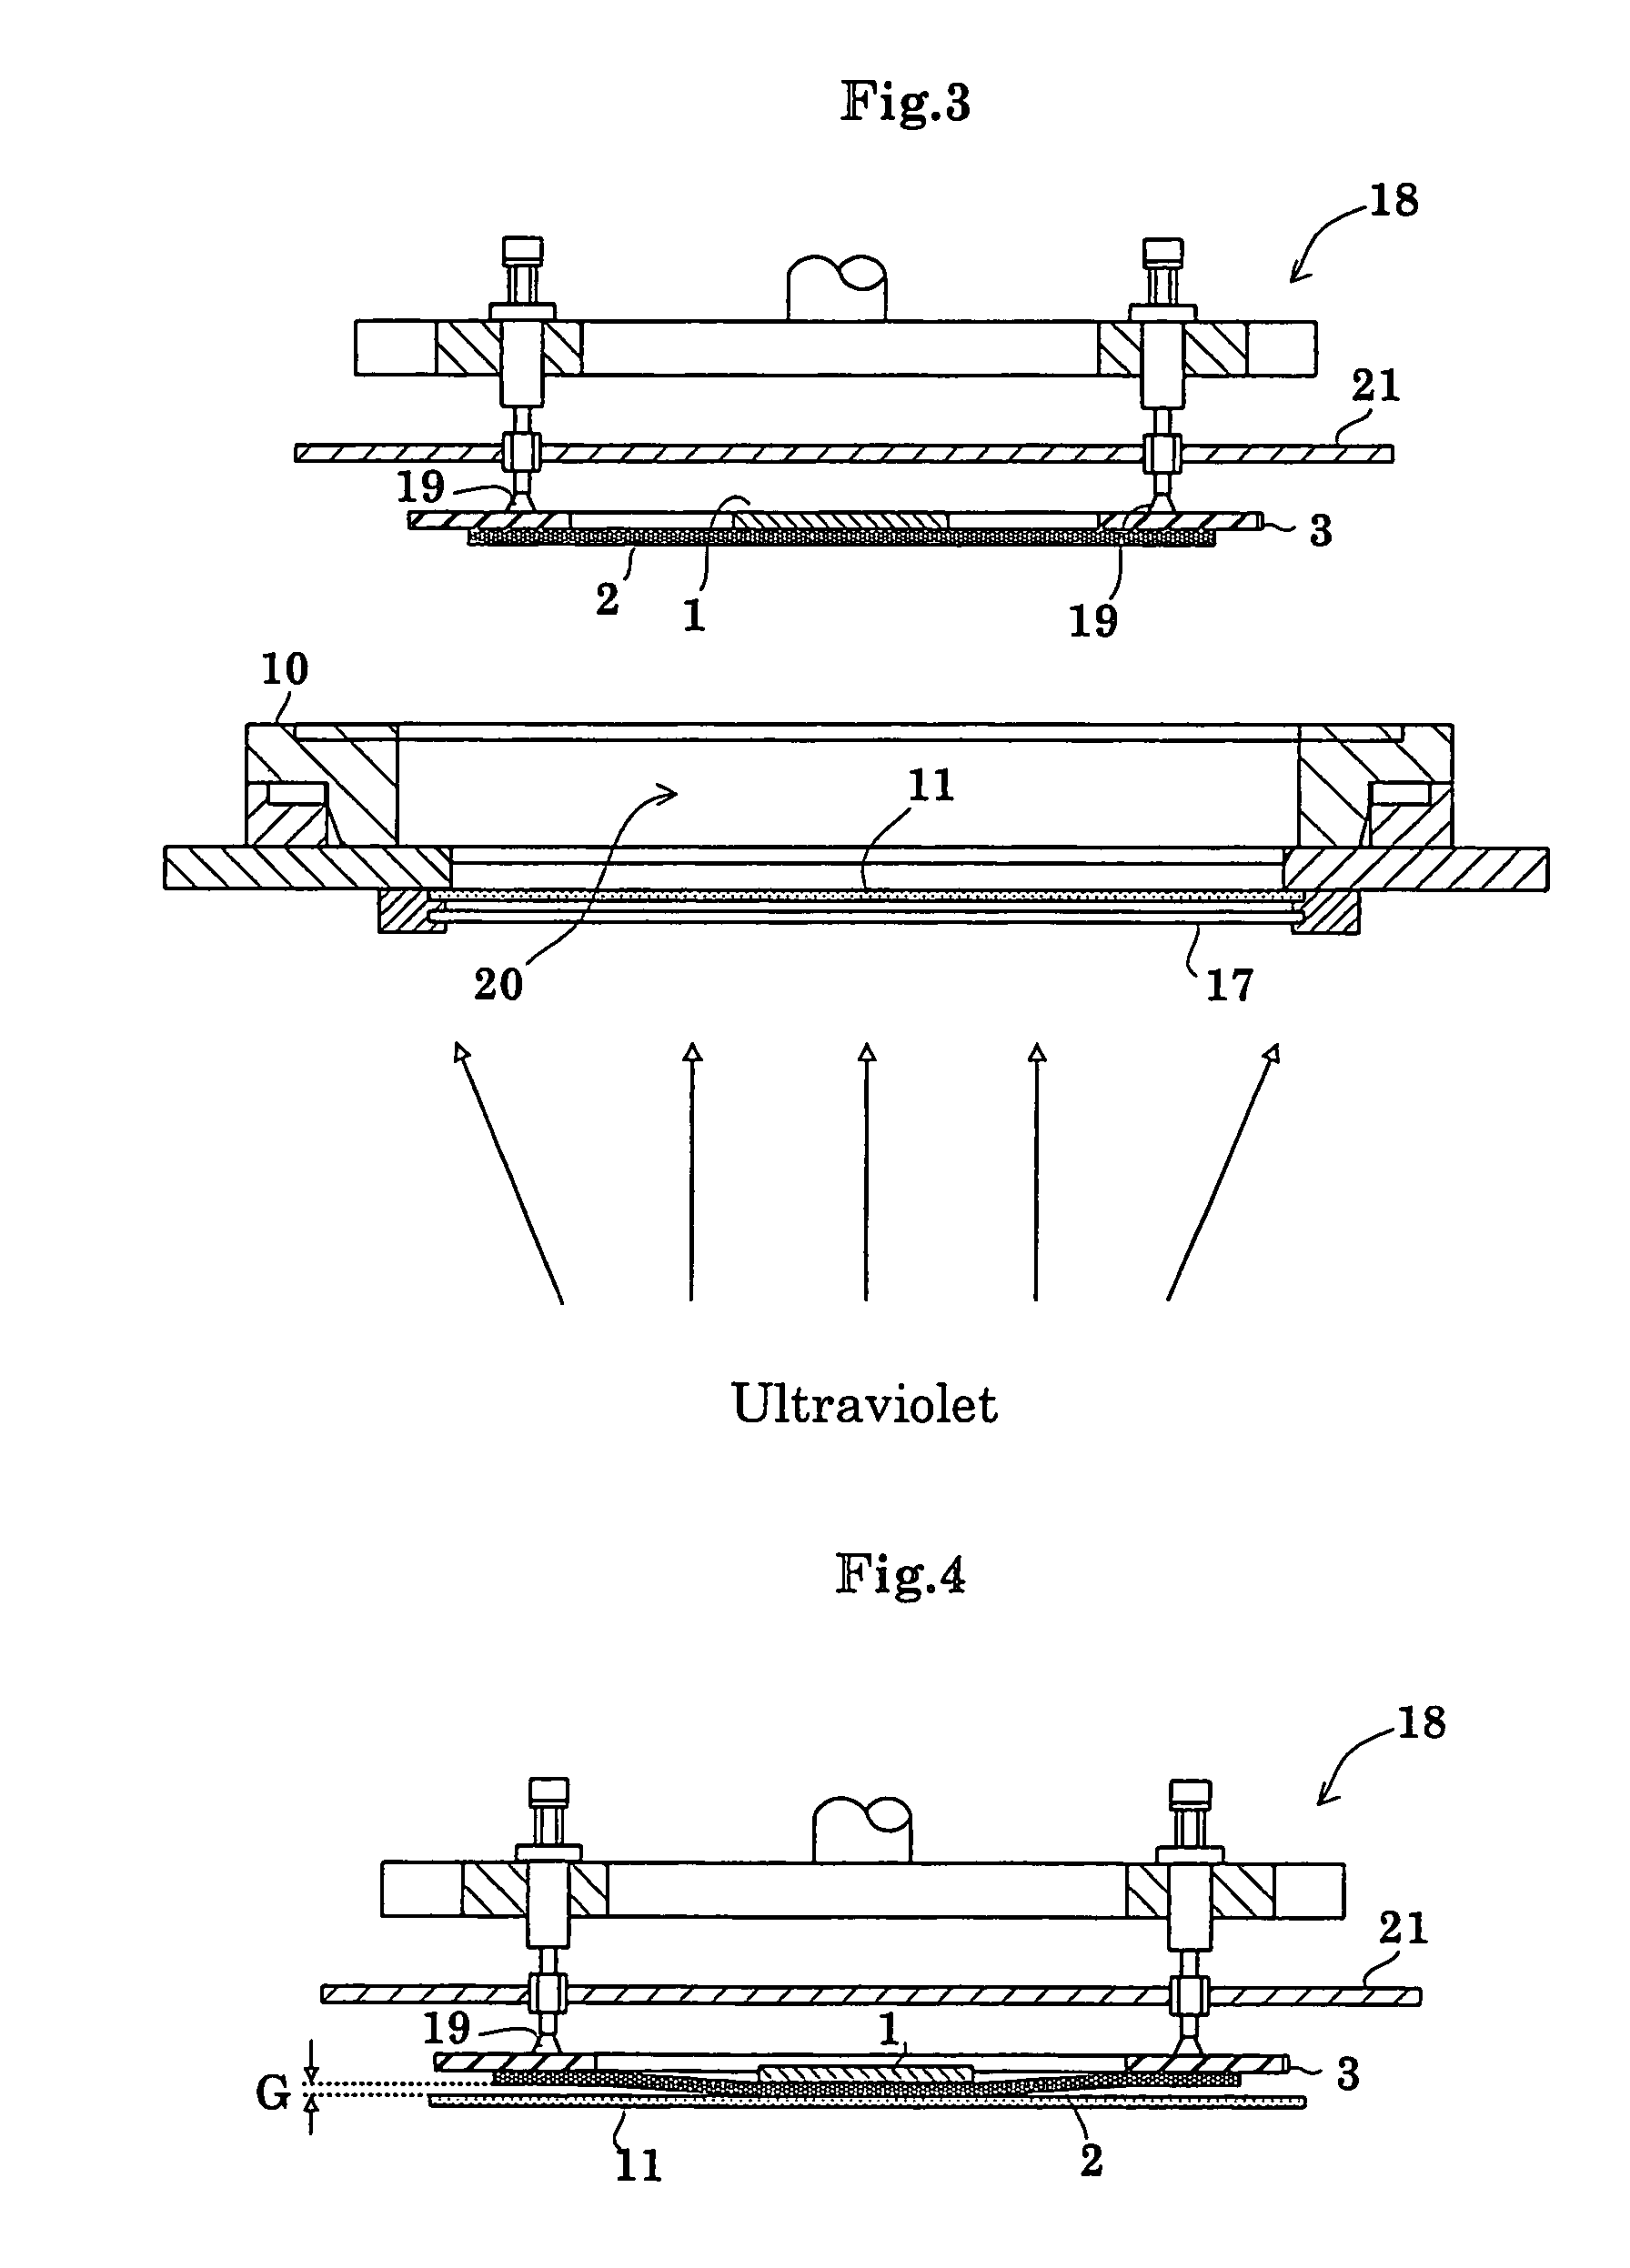 Ultraviolet irradiating method and an apparatus using the same